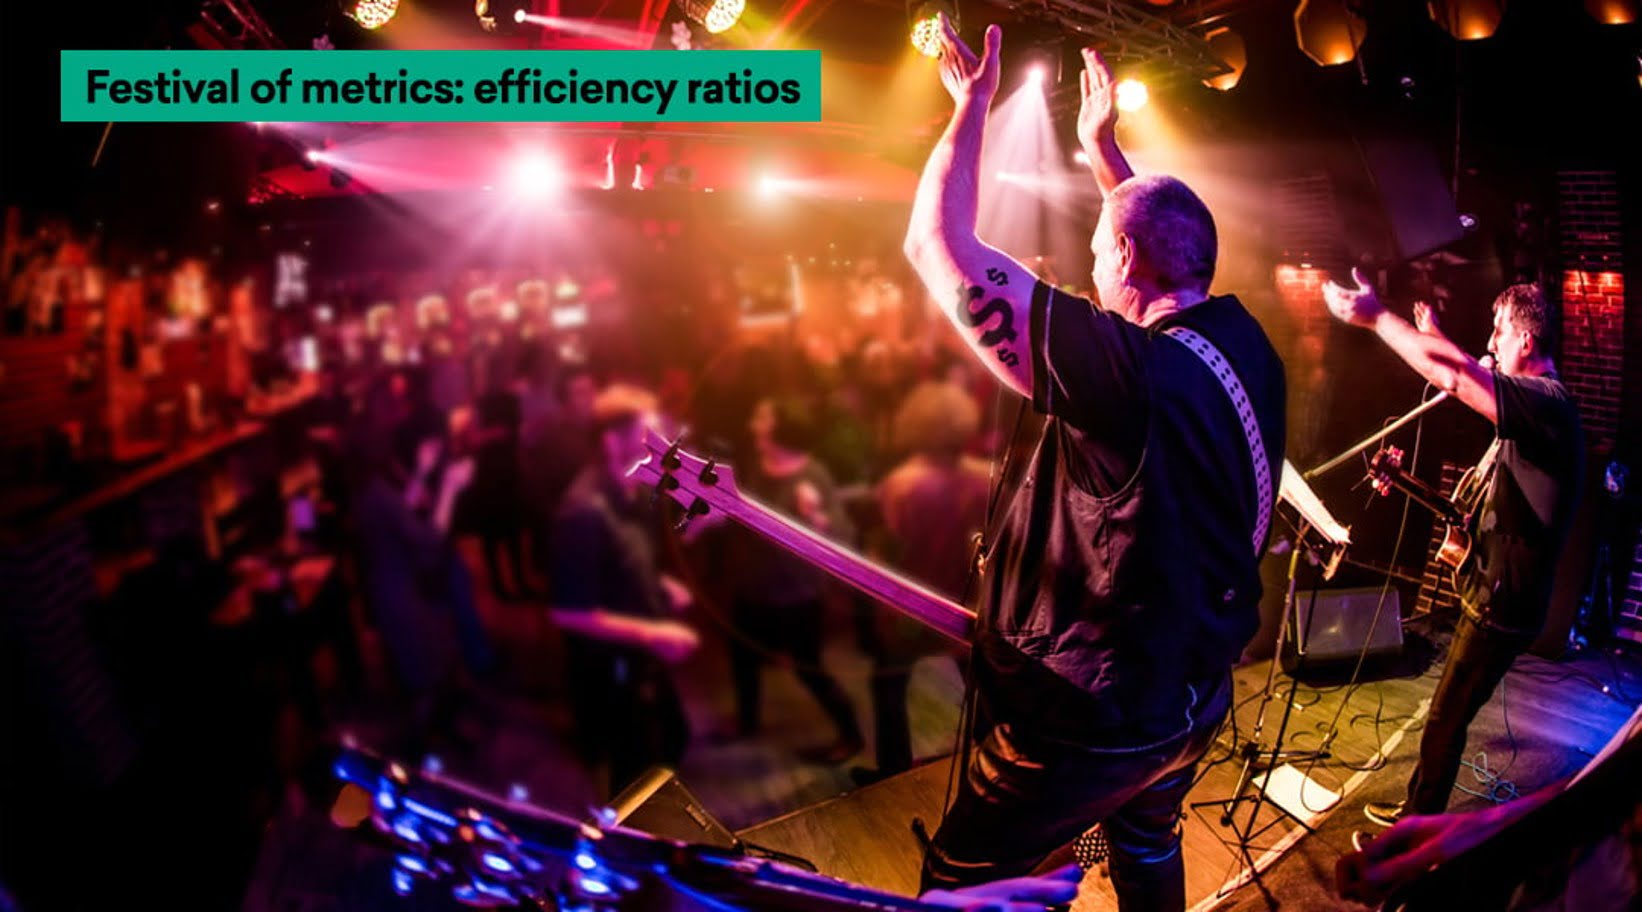 Keep the festival going with efficiency ratios